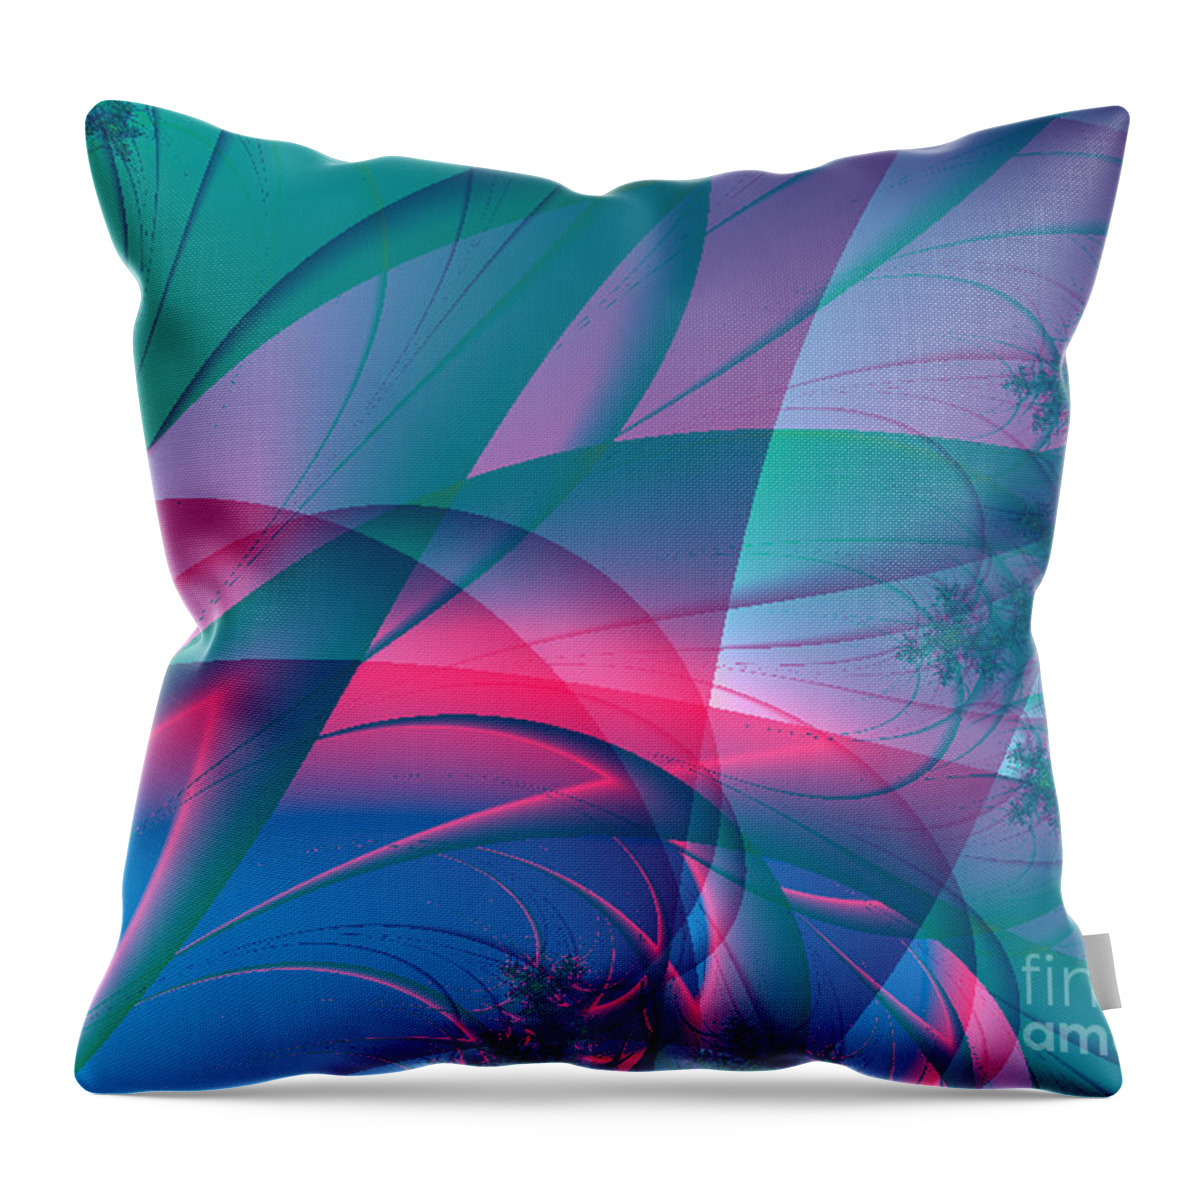 2-dimensional Throw Pillow featuring the digital art Lean On Me by Dana Haynes